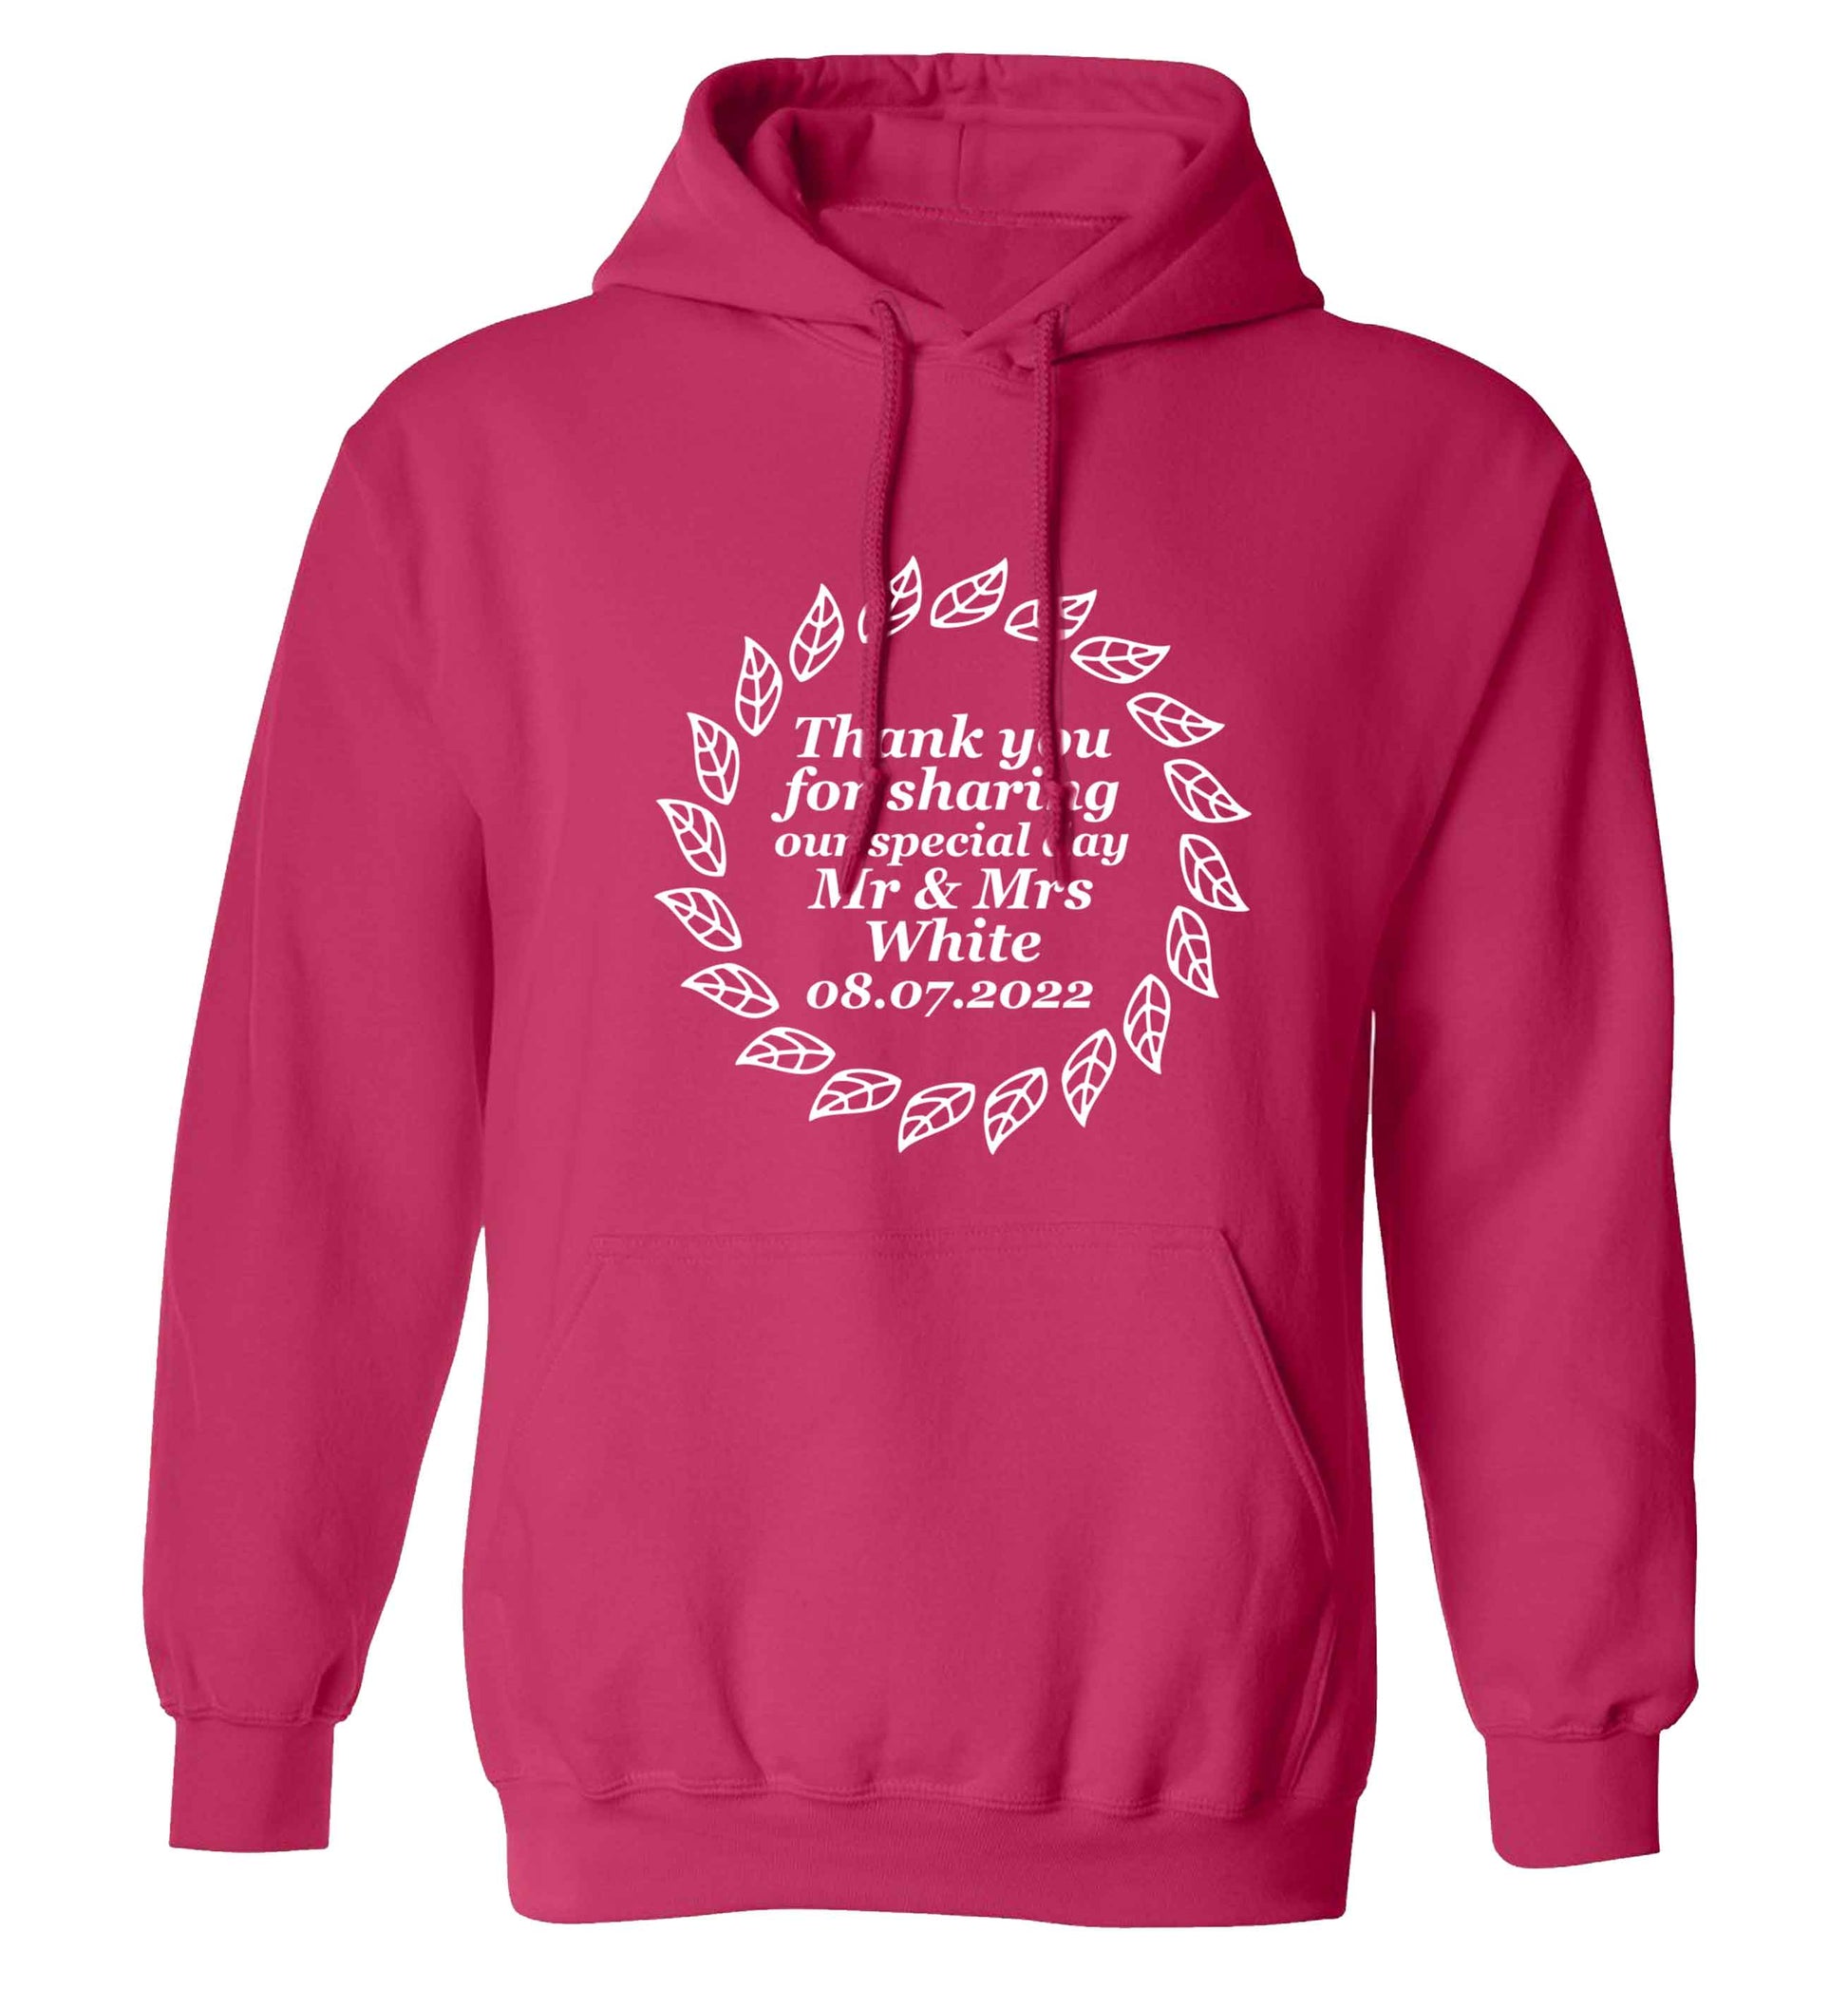 Personalised wedding thank you's Mr and Mrs wedding and date! Ideal wedding favours! adults unisex pink hoodie 2XL